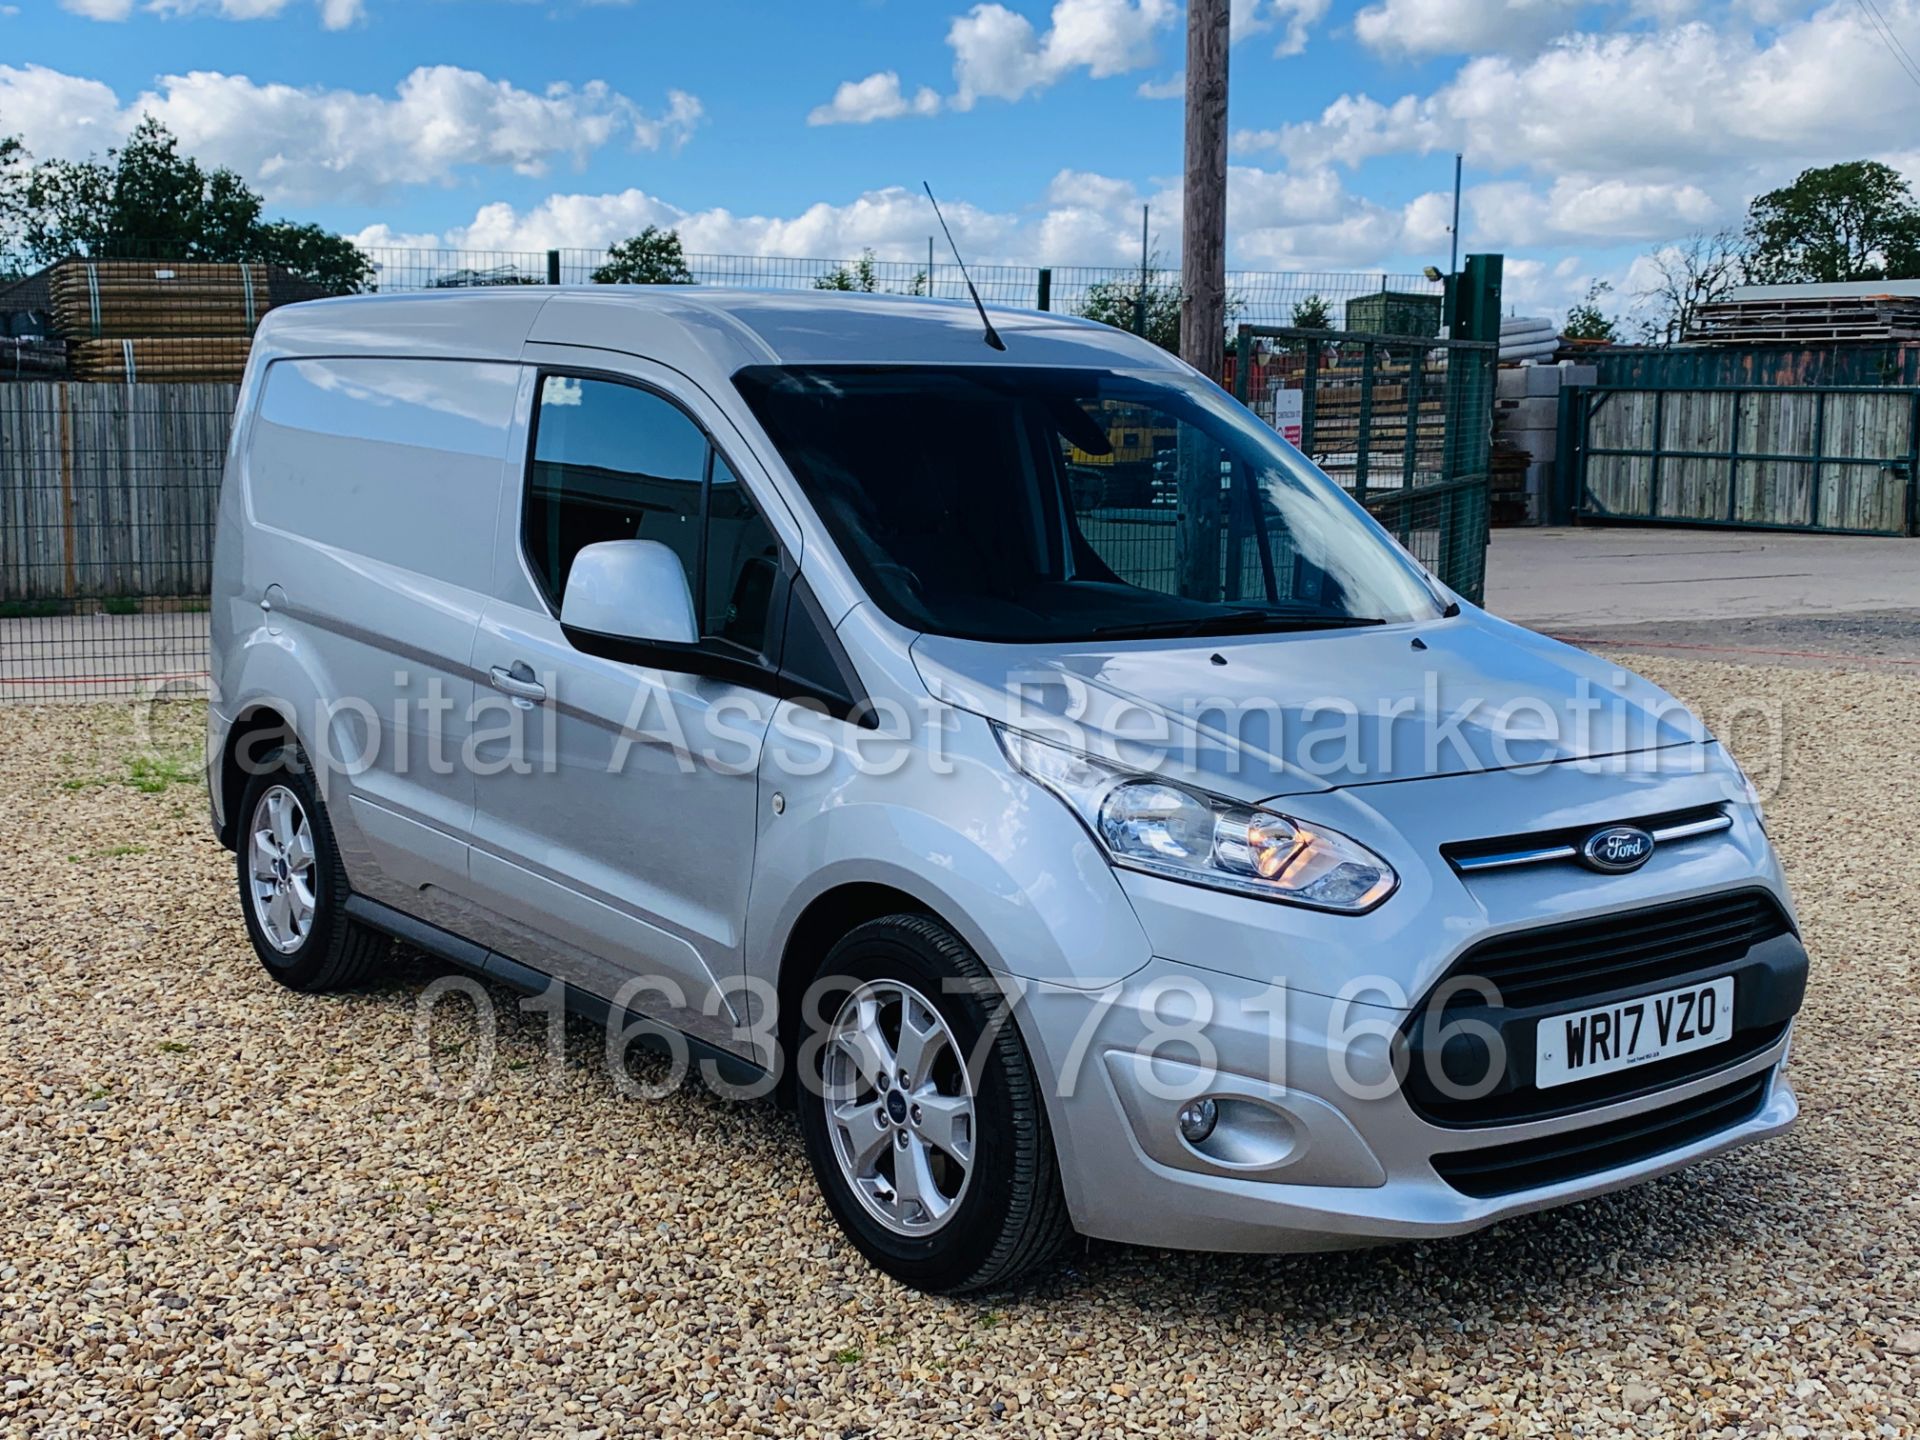 FORD TRANSIT CONNECT *LIMITED EDITION* SWB PANEL VAN (2017) '1.5 TDCI- 120 BHP - 6 SPEED' *TOP SPEC* - Image 2 of 44